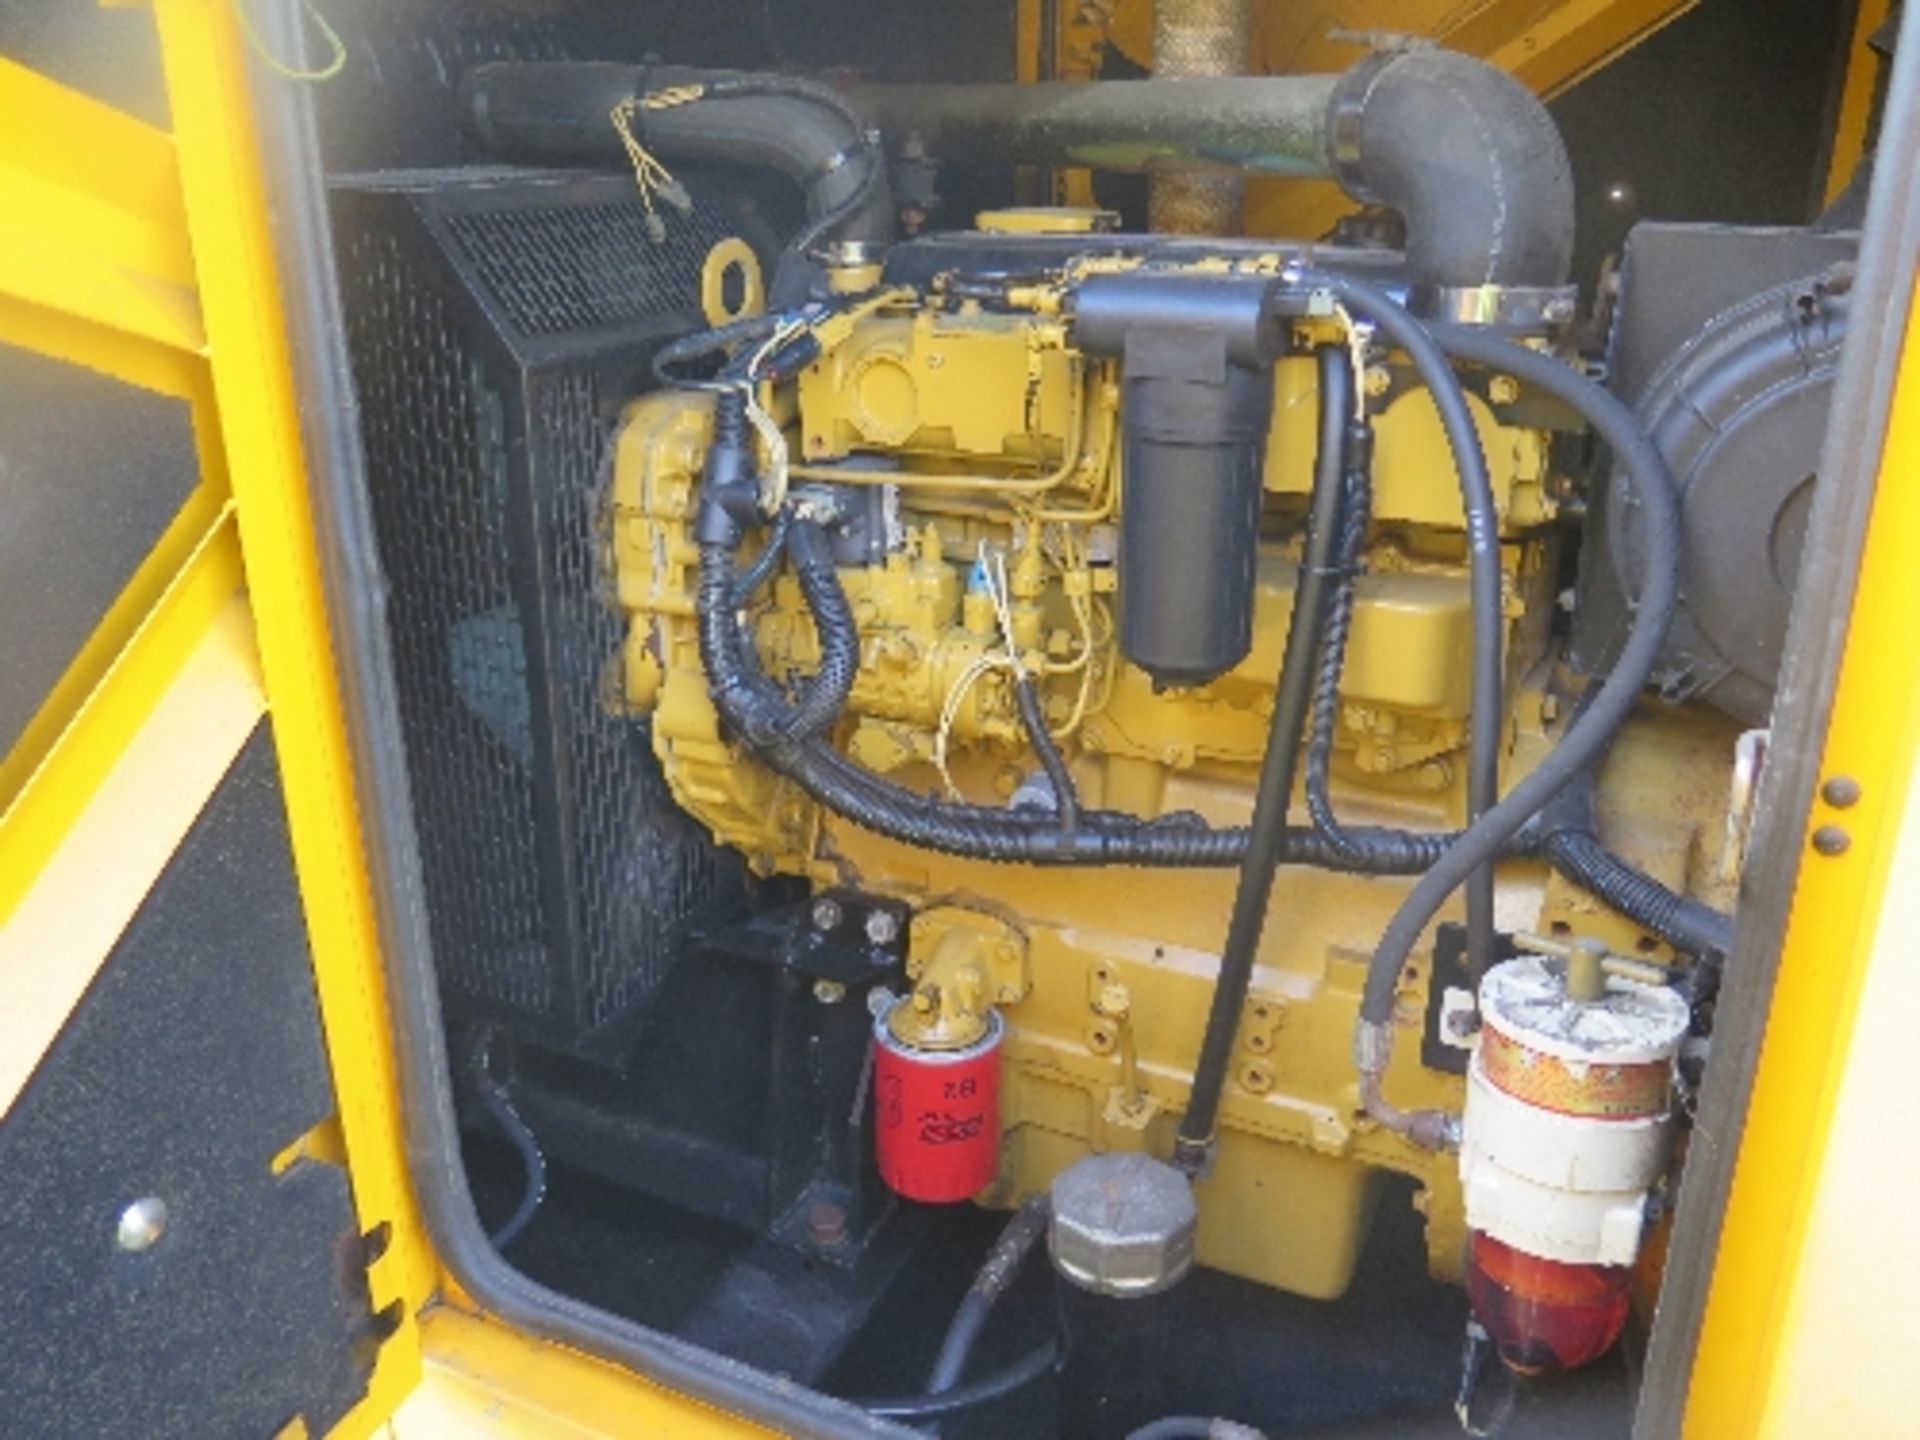 Caterpillar XQE100 generator 158072 12811 hrs
PERKINS - RUNS AND MAKES POWER
ALL LOTS are SOLD - Image 3 of 6